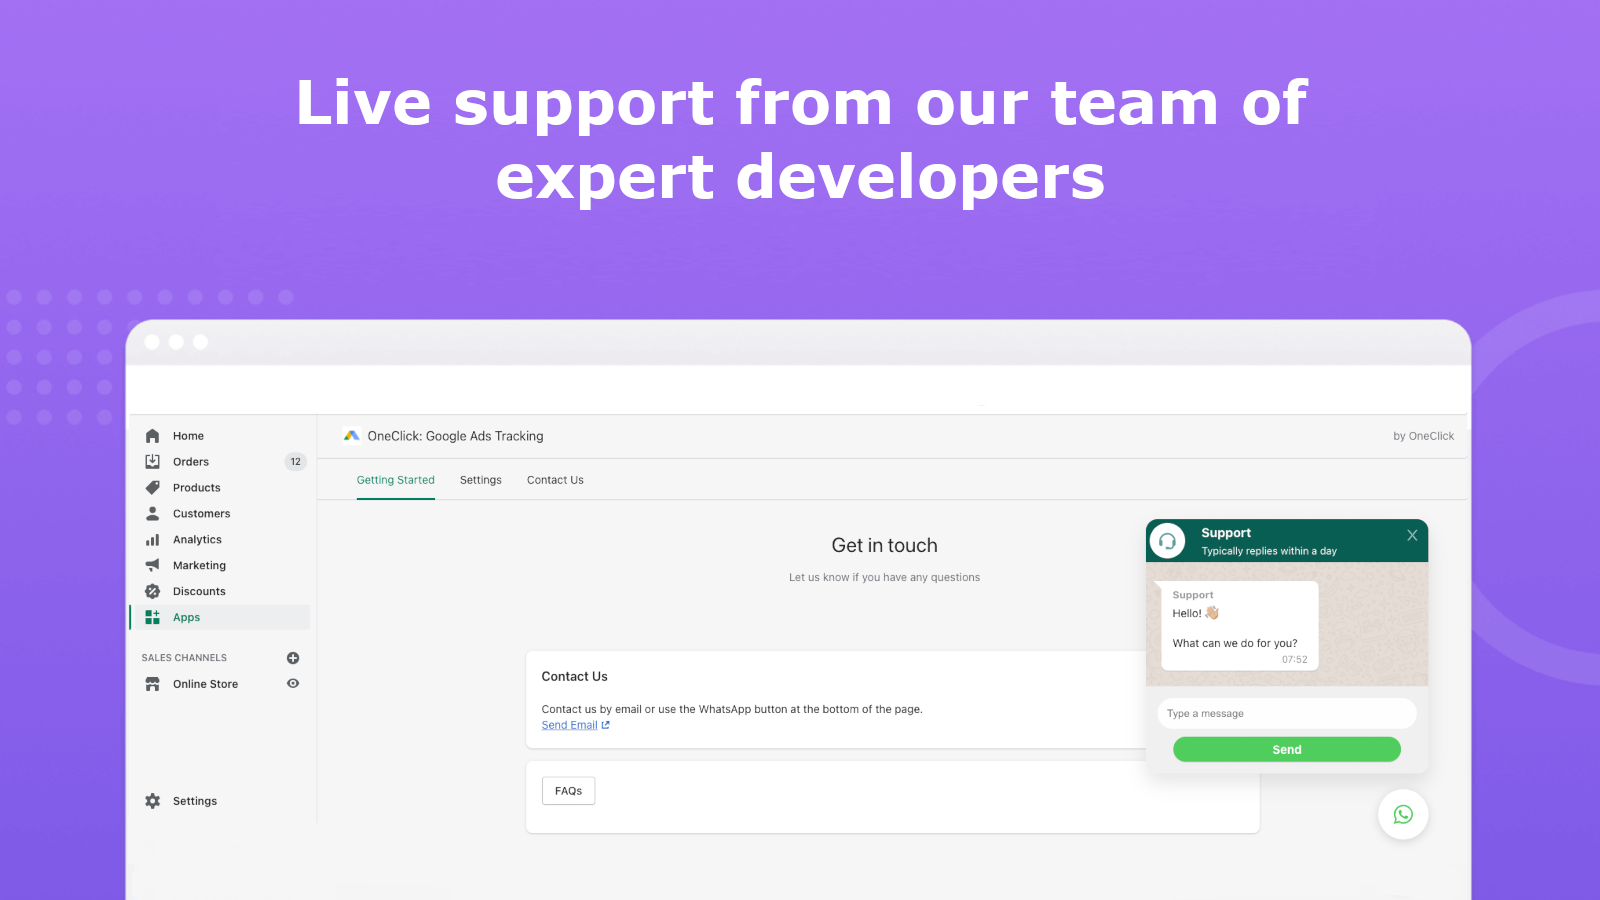 Live support from our expert developers